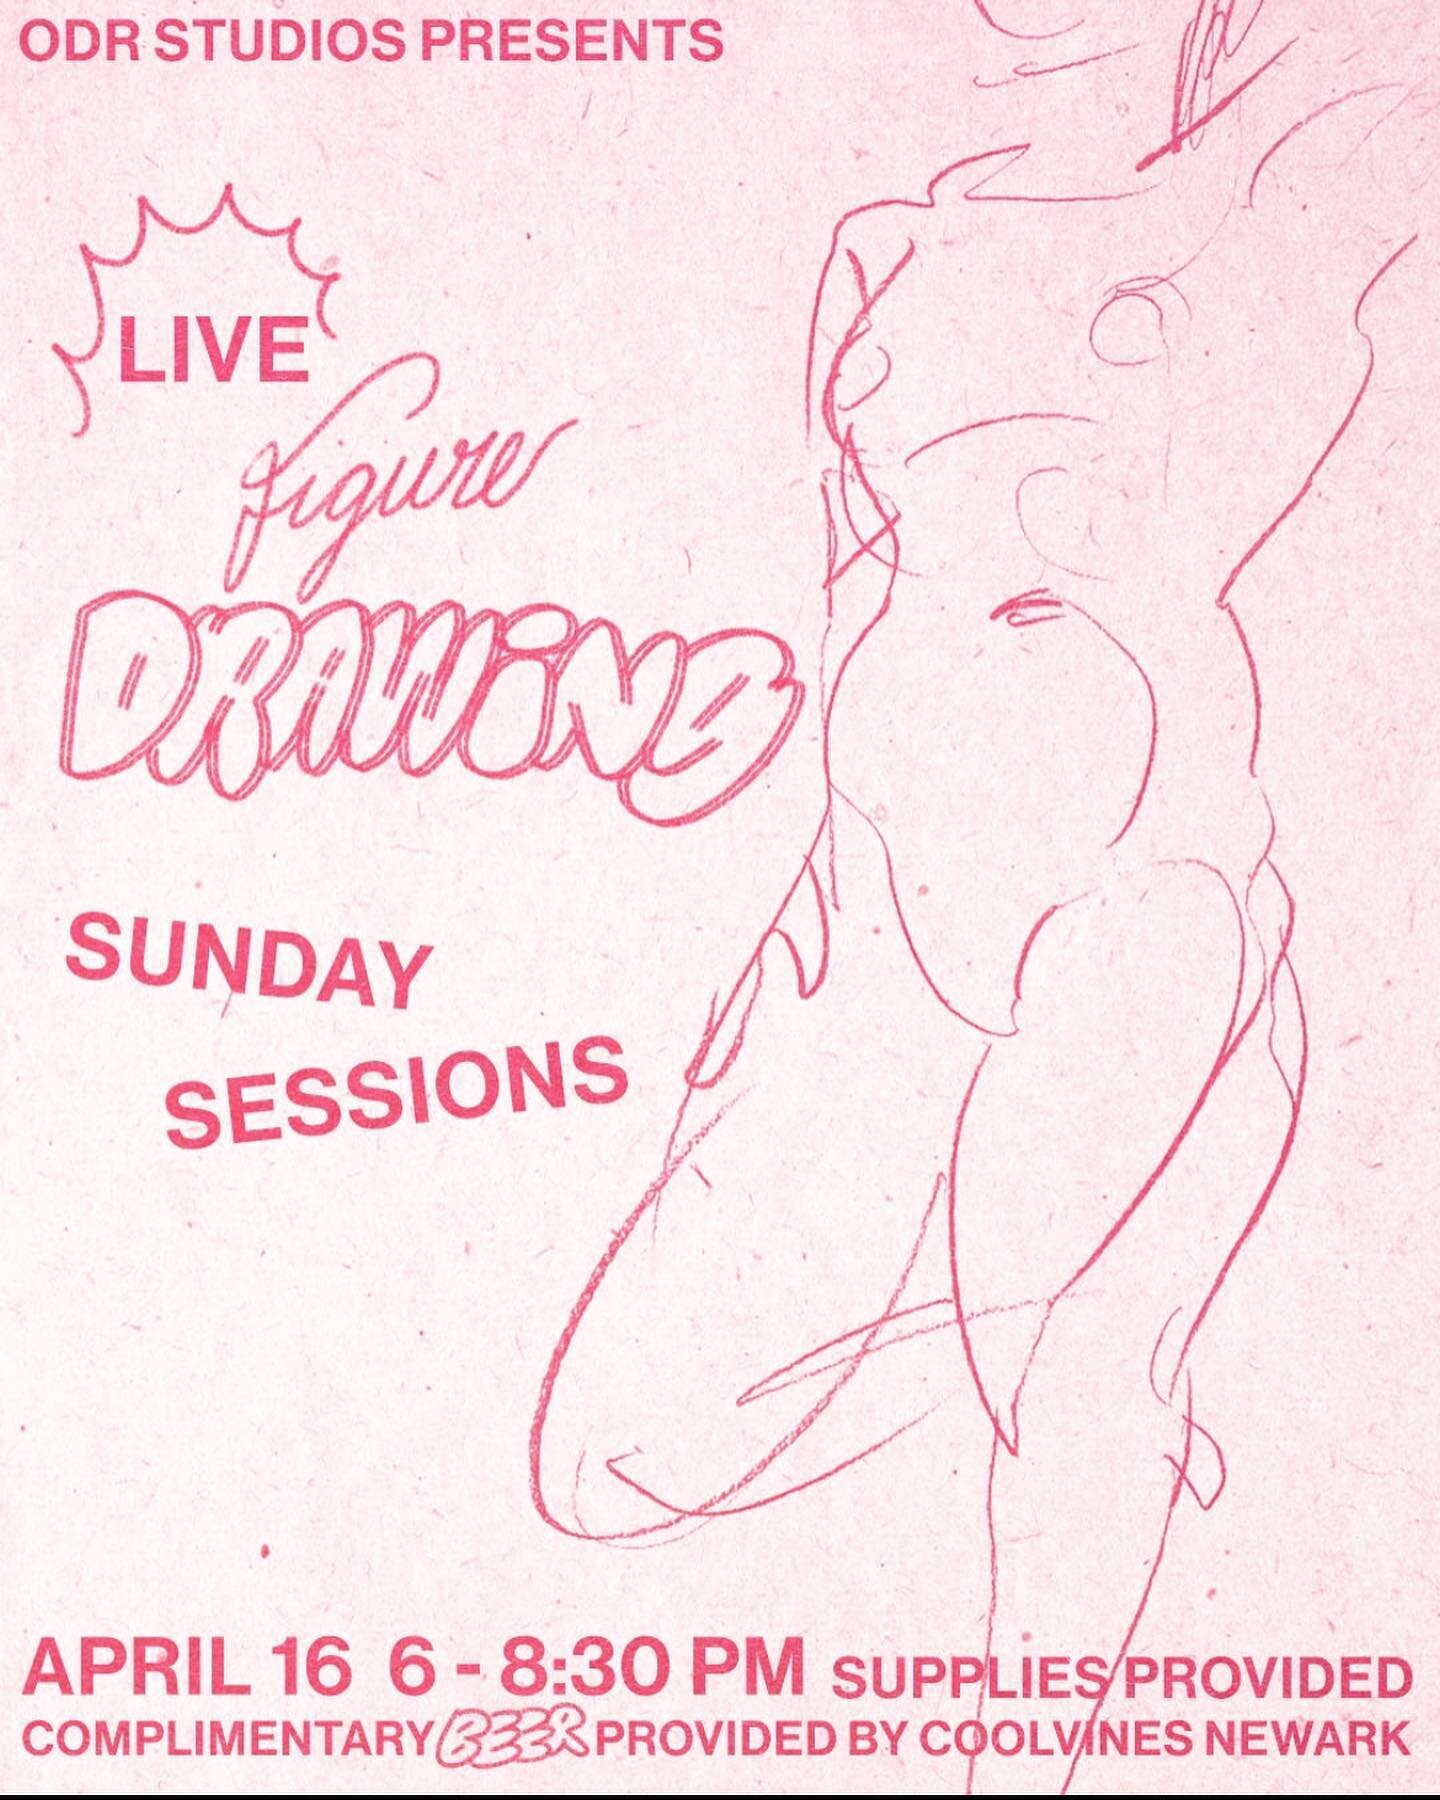 Hosting my first of what will be a monthly series of figure drawing sessions at the gorgeous @odrstudios Sunday 4.16 6-8:30 pm. All levels welcome! Supplies and drinks provided but bring your own is welcome ✍️

Sign up link in bio ✨